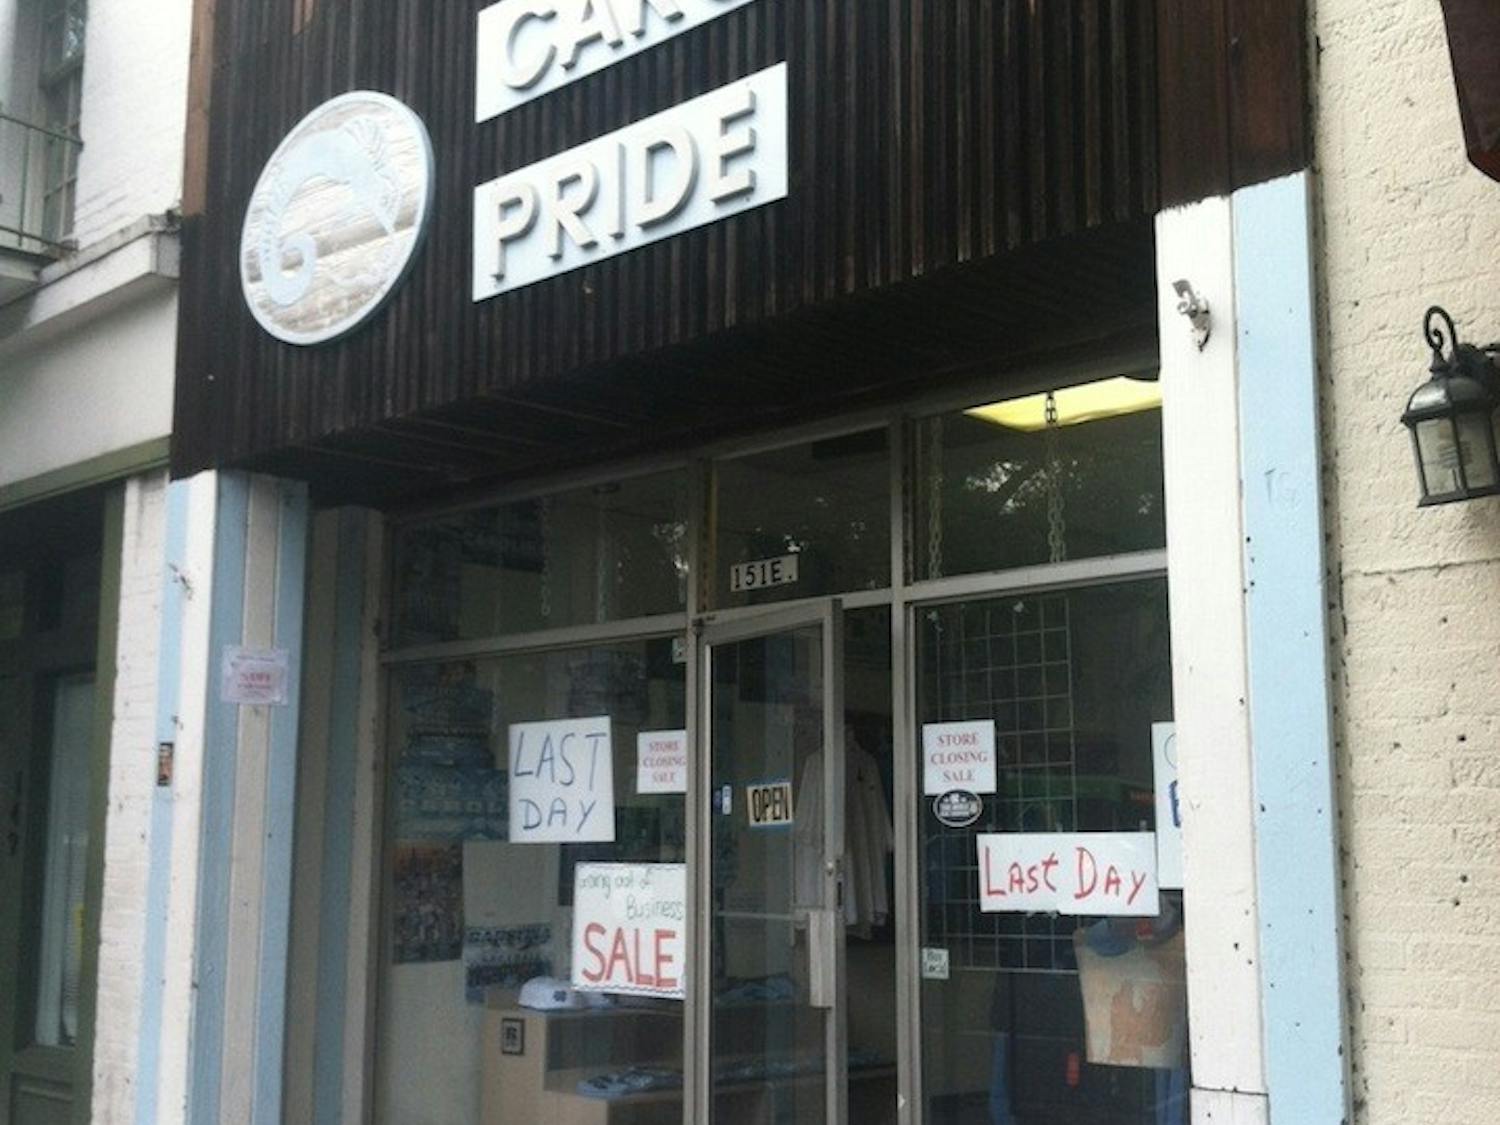 	Carolina Pride sportswear held a going-out-of-business sale Tuesday.